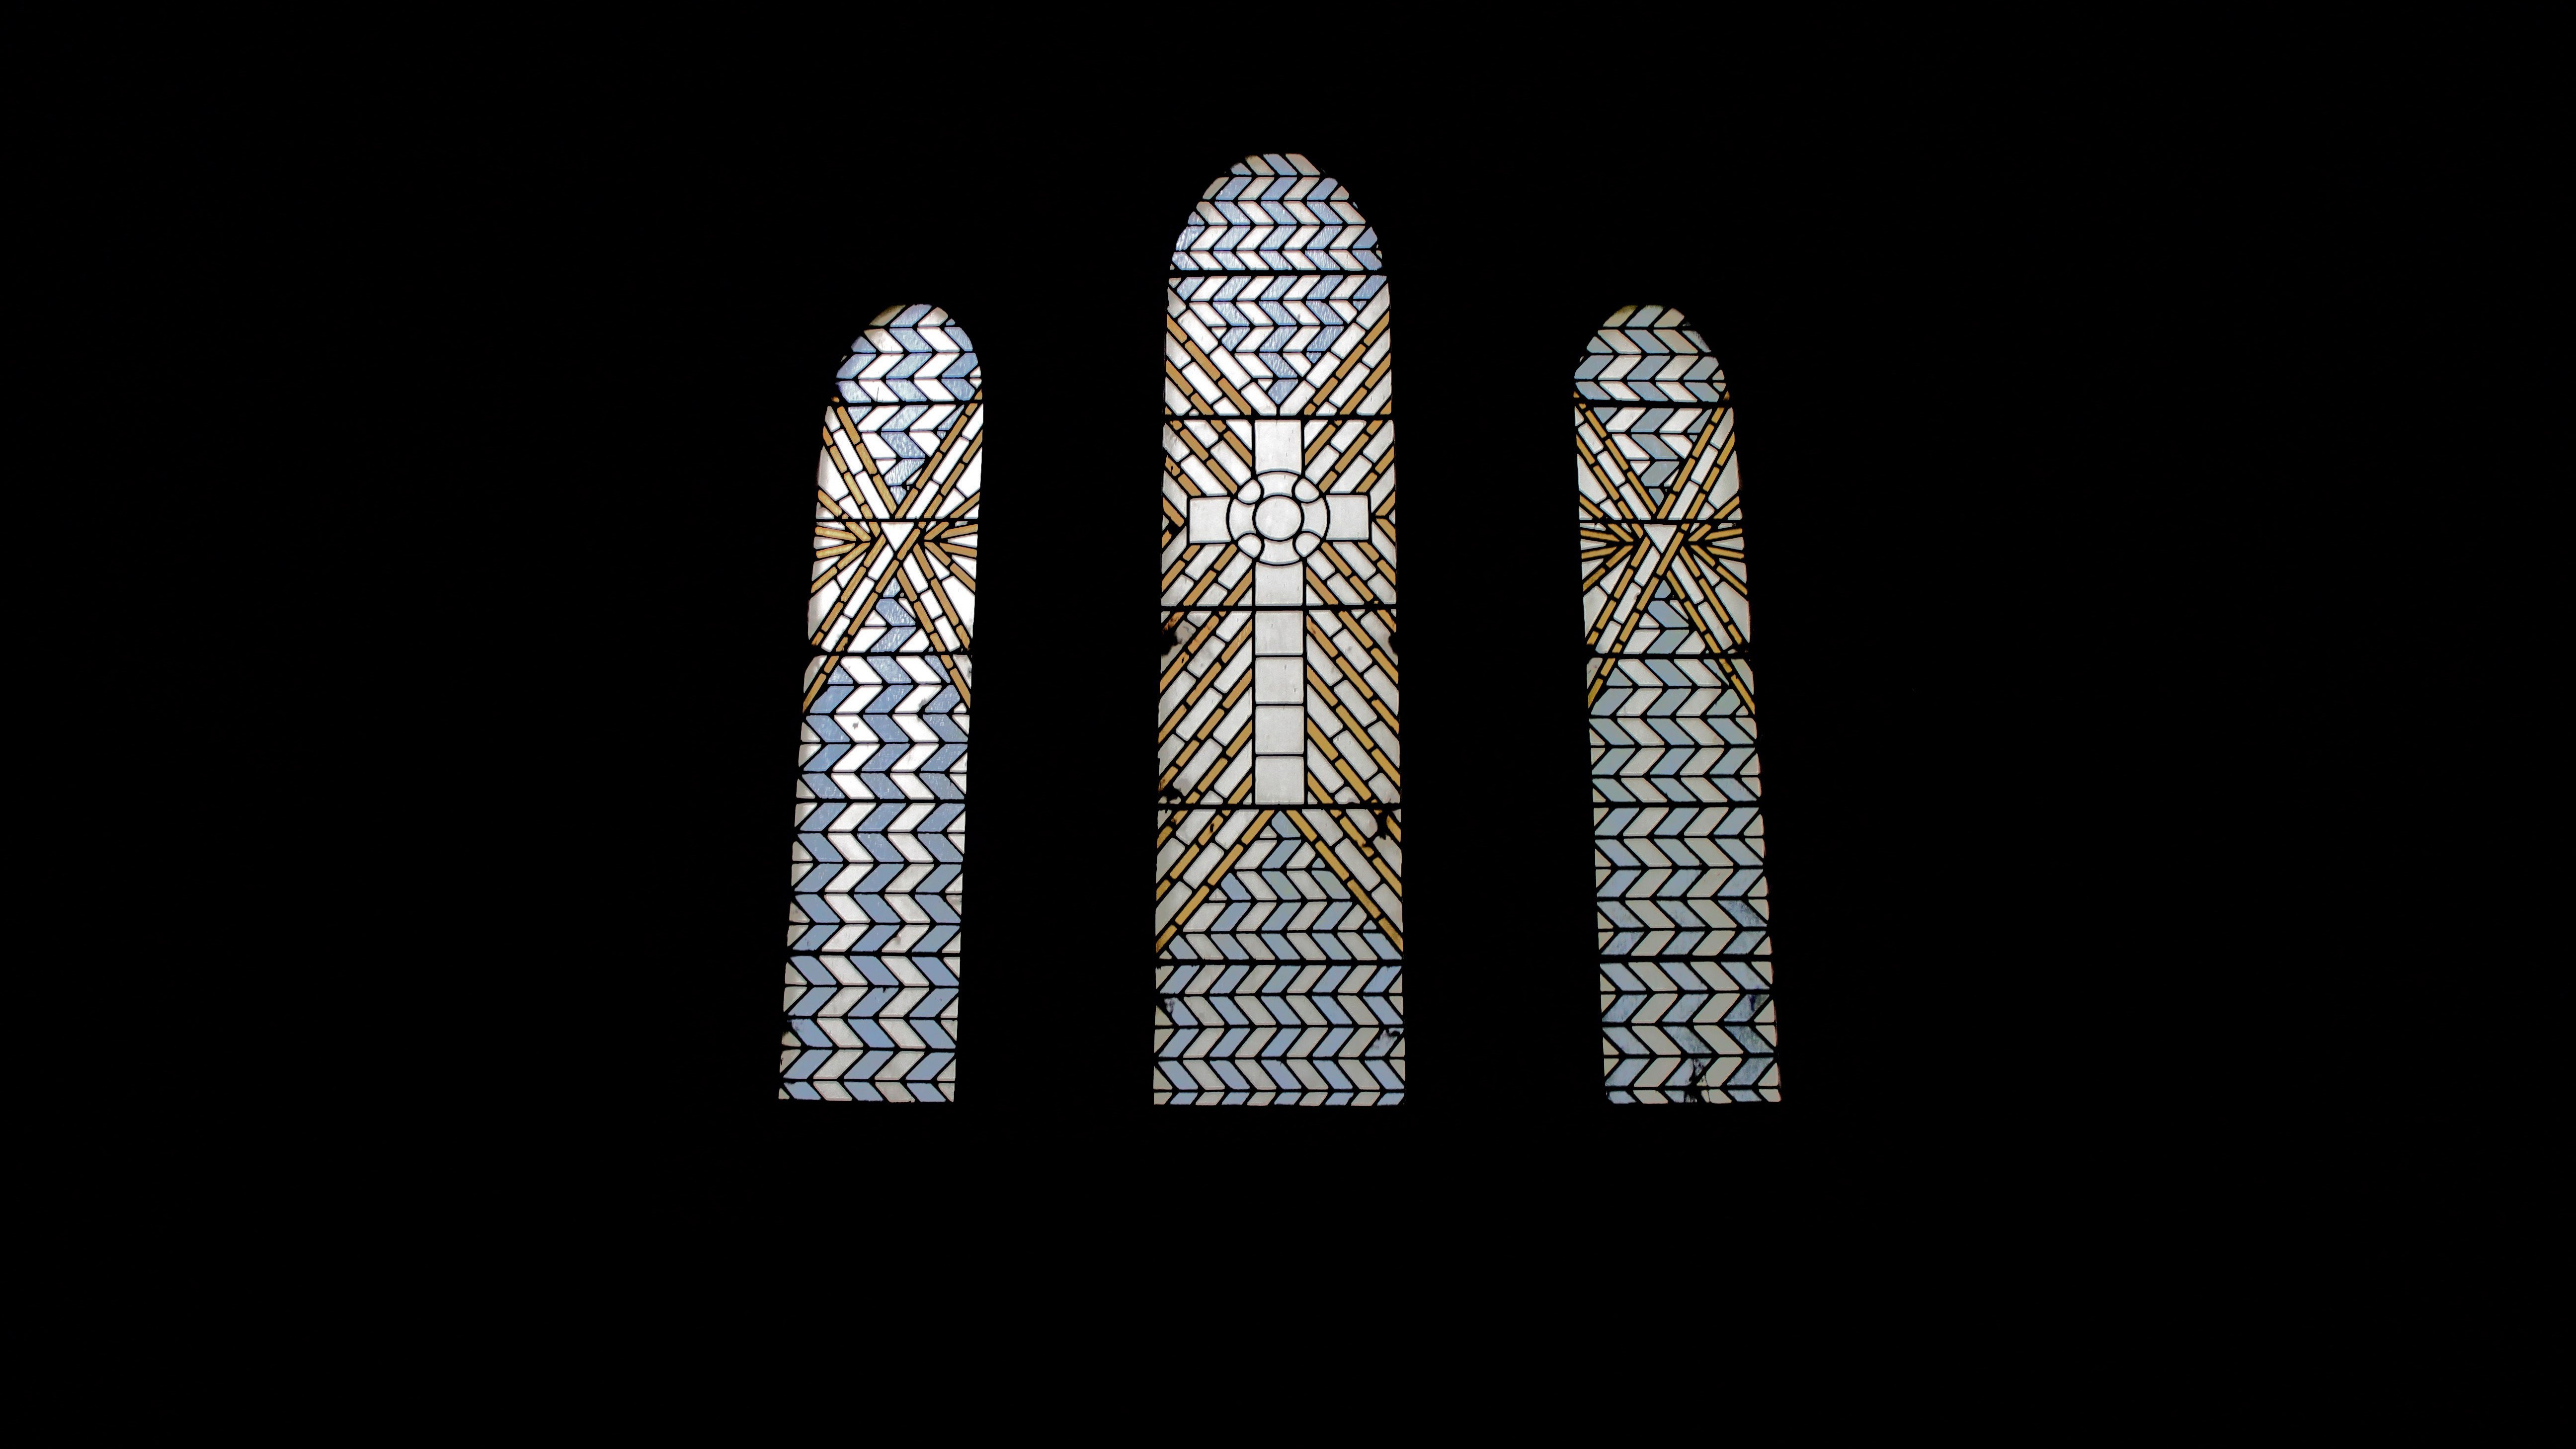 Negative Space Window Stained Glass Church Architecture